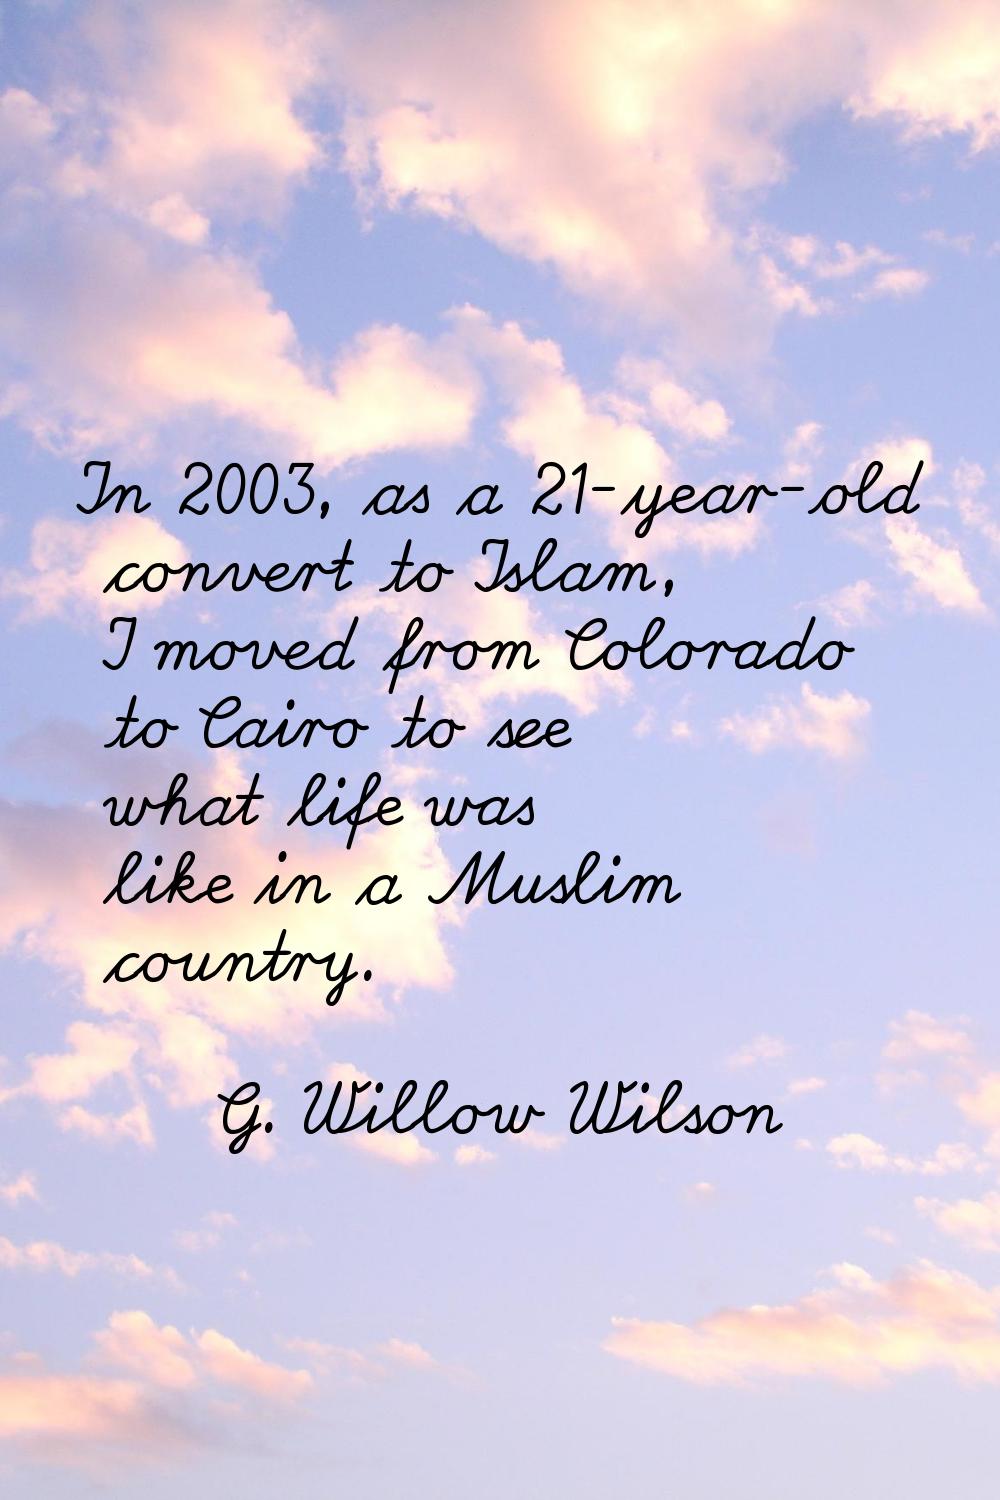 In 2003, as a 21-year-old convert to Islam, I moved from Colorado to Cairo to see what life was lik